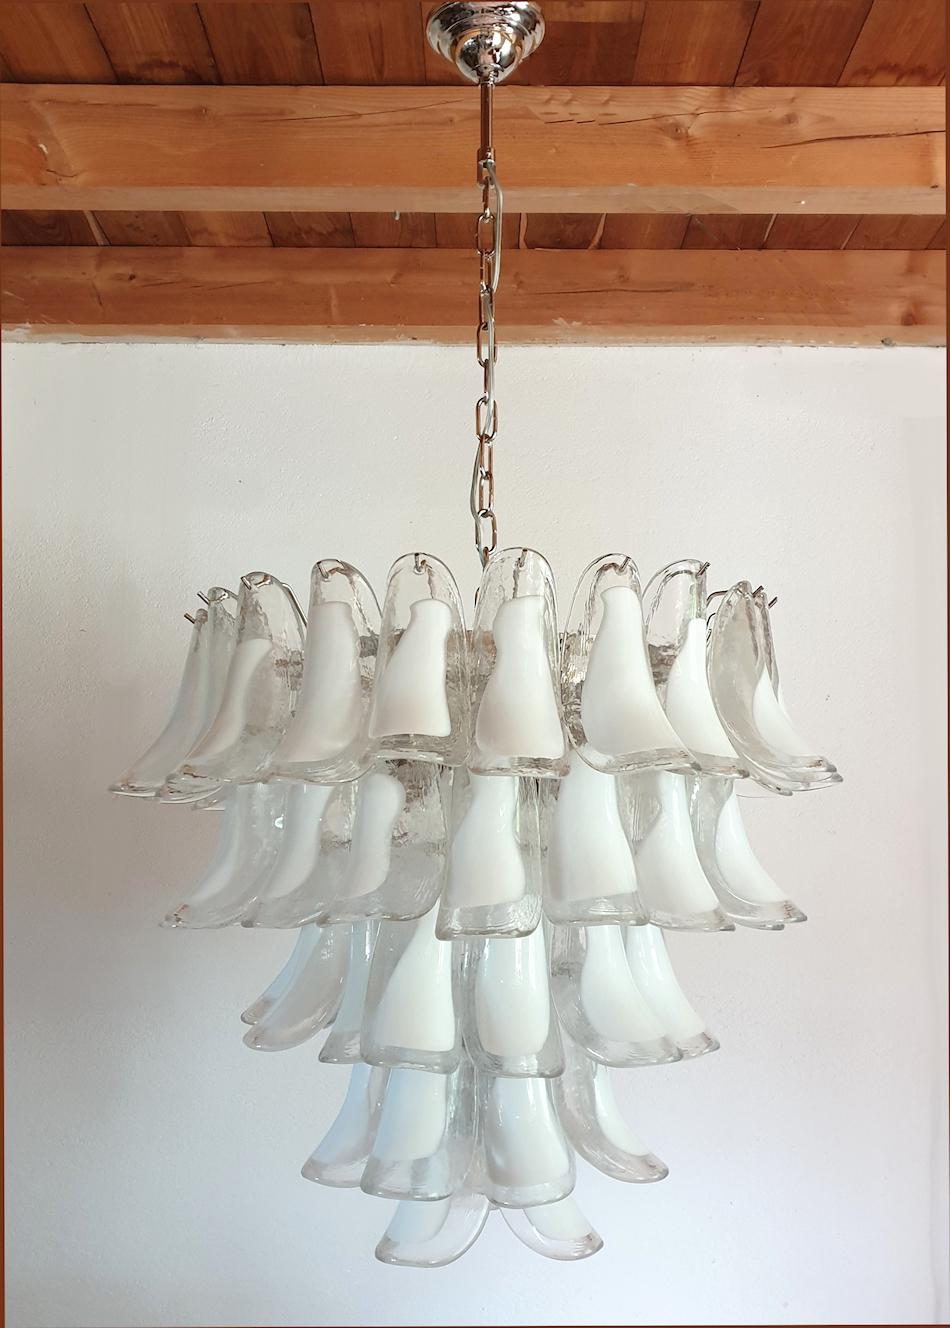 Large Mid Century Modern white Murano glass petal chandelier, by Mazzega, Italy 1980s.
The five-tier chandelier is made of a chrome frame and white and clear Murano glass petals.
It has 7 lights and is rewired for the US. (or Europe on request)
The